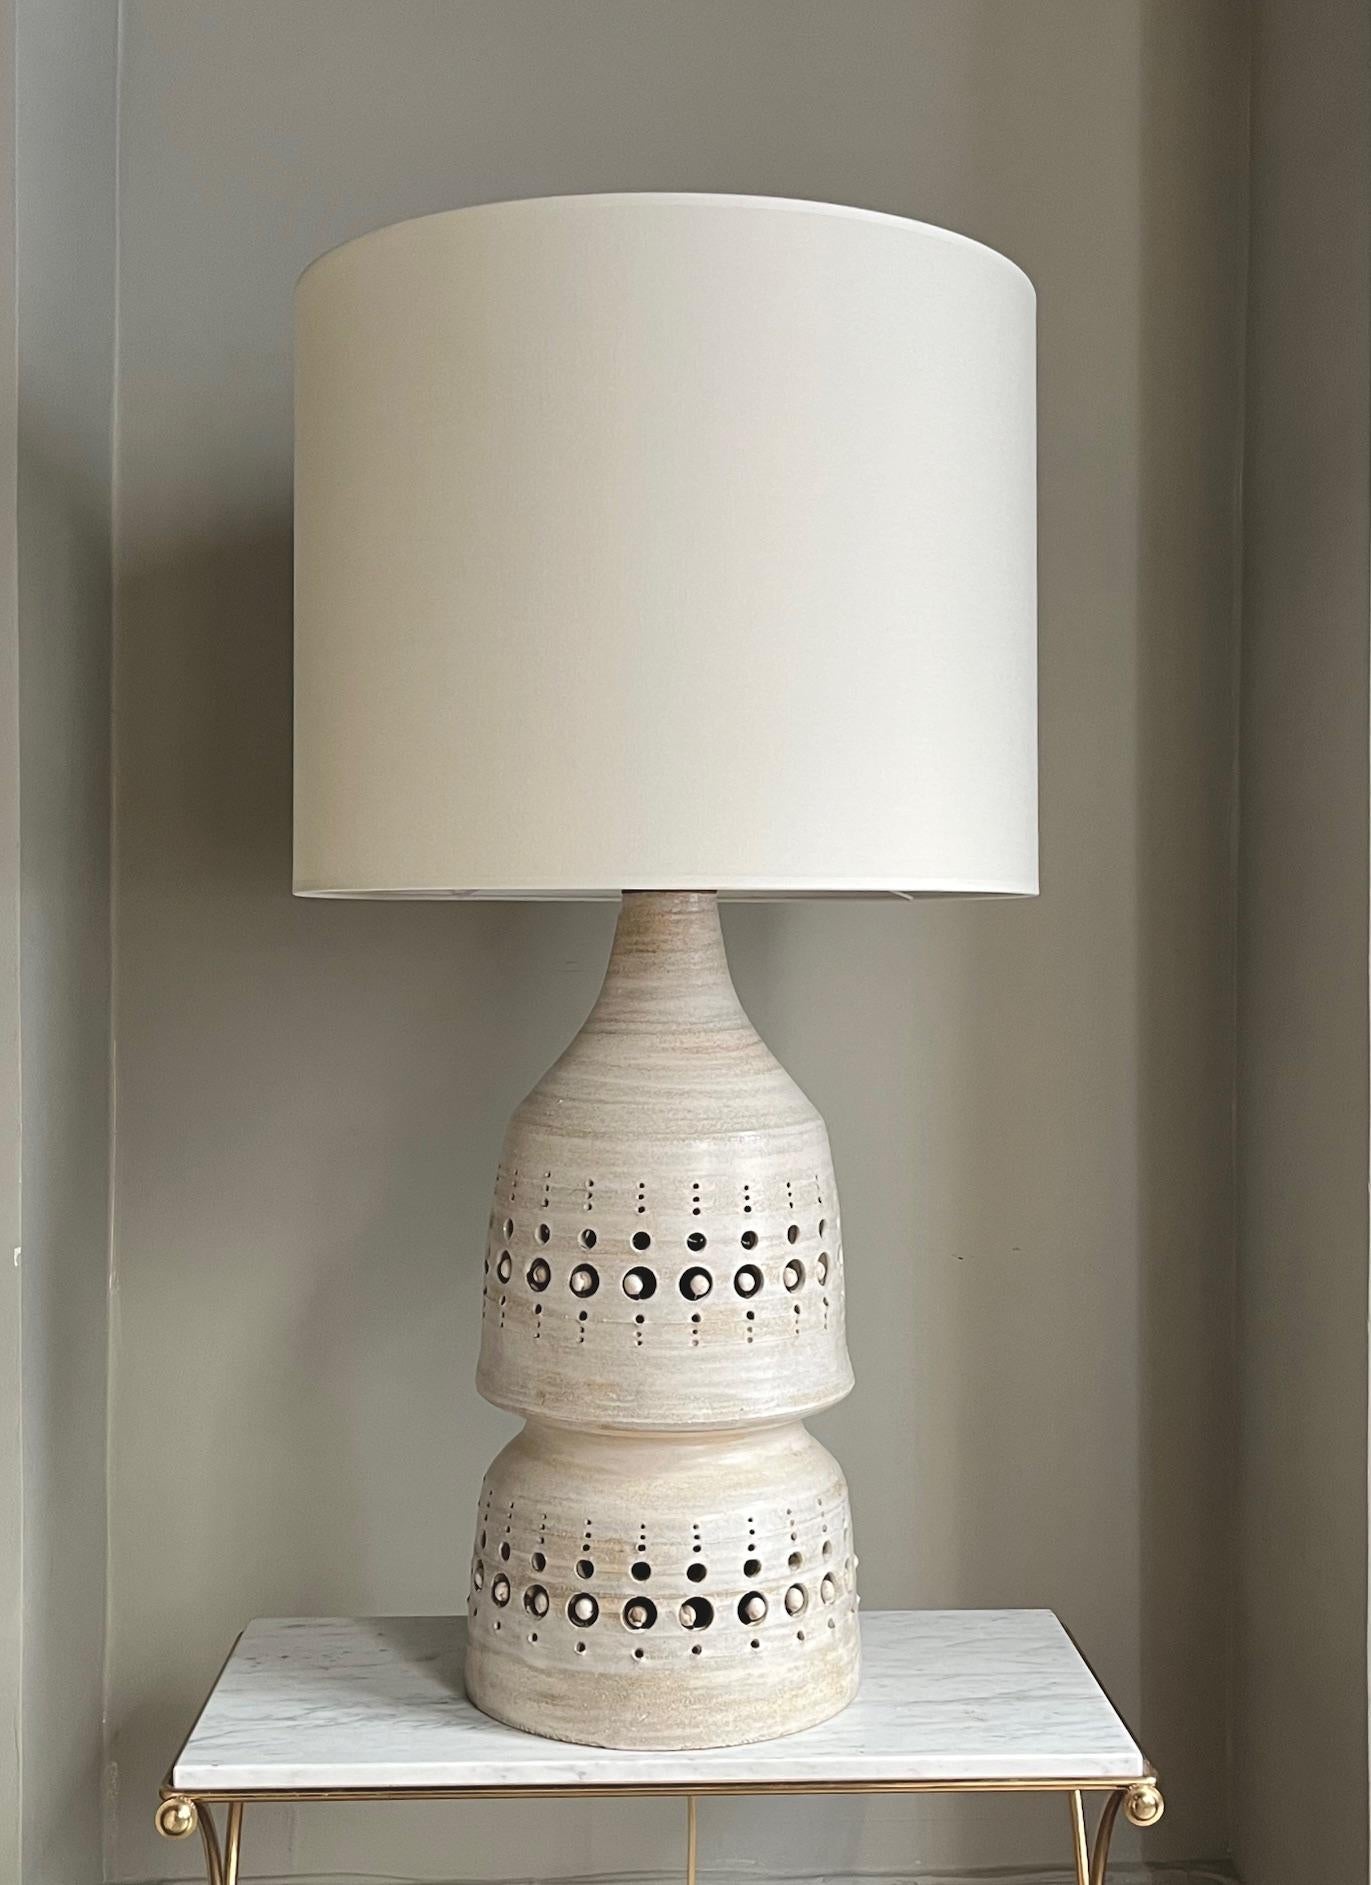 Tall glazed ceramic table lamp. 
Openwork around the whole body of the lamp.
The ceramic is glazed in shades of cream or beige. 
Double electrification with light inside the lamp's body 
Rewired 
Circa 1970.
Georges Pelletier ( 1938/2024)

Height